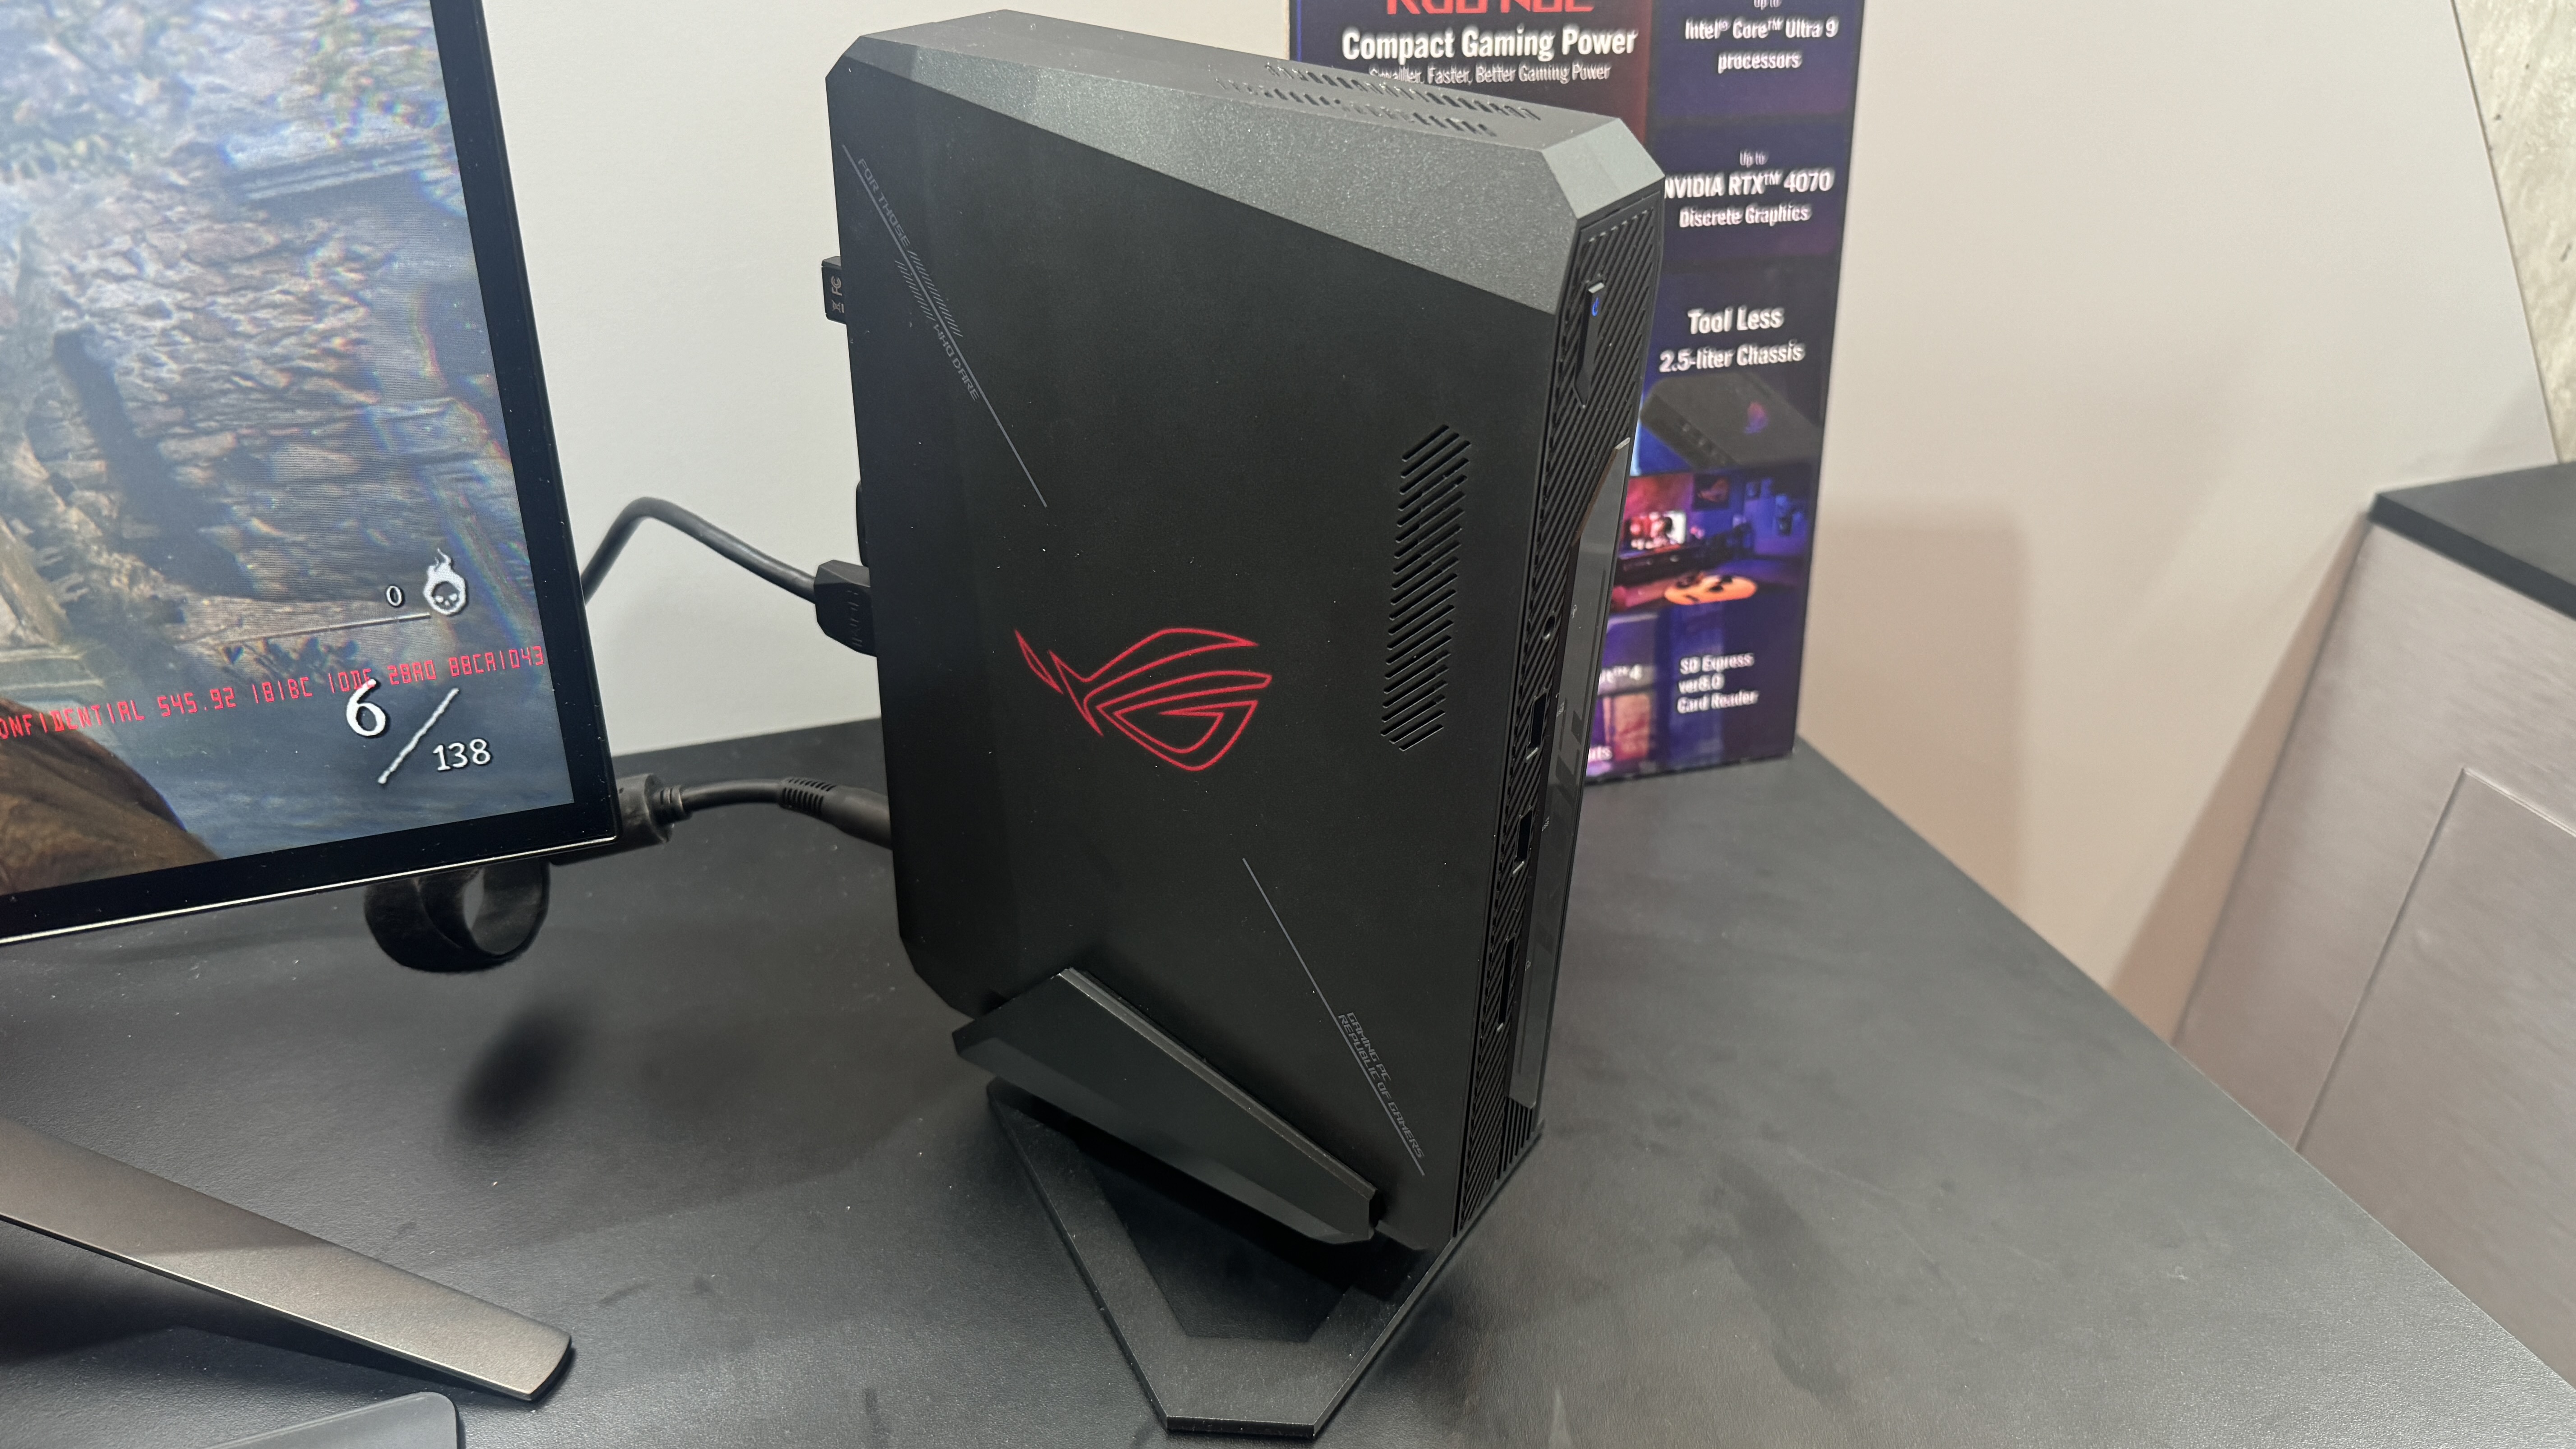 Asus Reportedly Preps ROG NUC To Replace Intel NUC Extreme